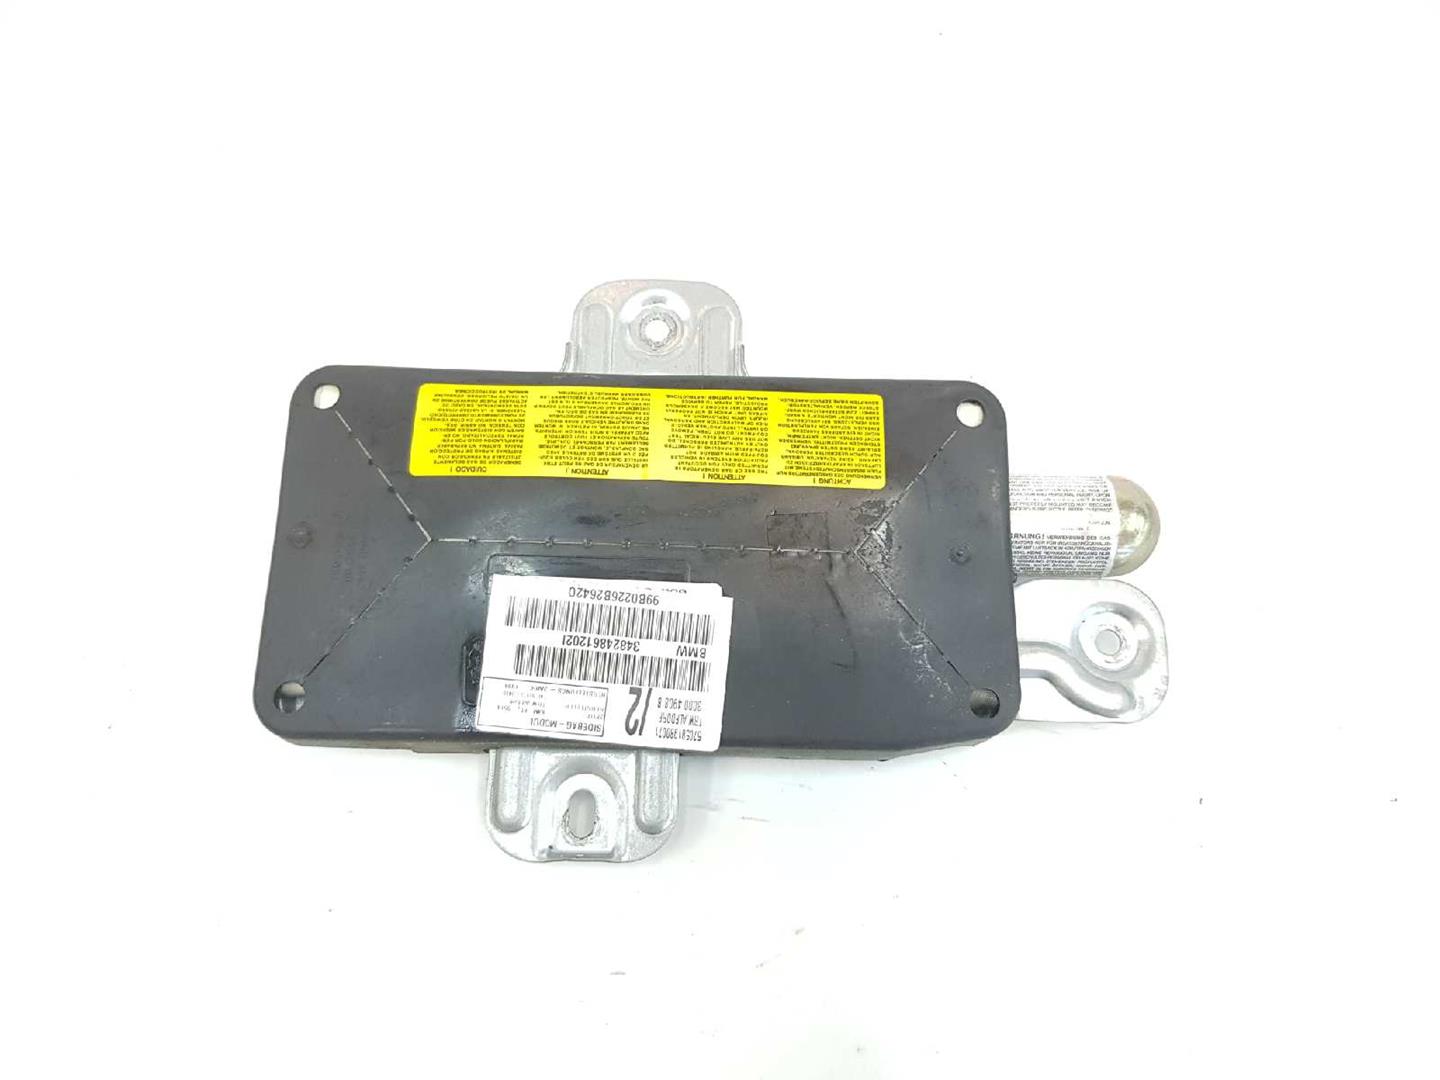 BMW 3 Series E46 (1997-2006) Front Right Door Airbag SRS 72127037234, 72127037234 19665304